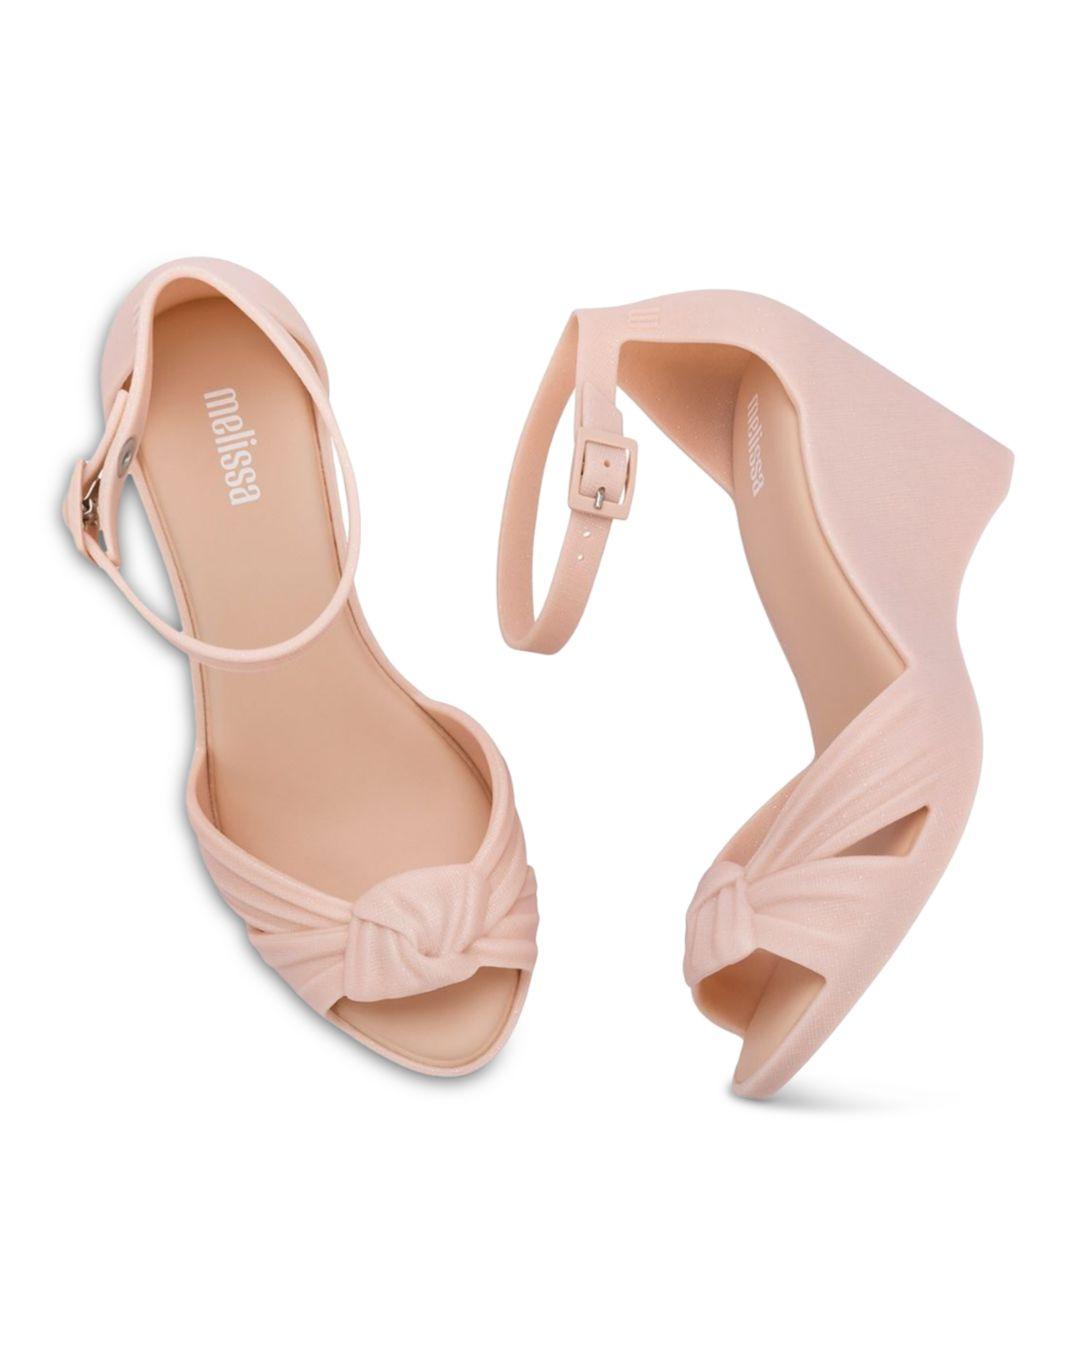 Melissa Strappy Knotted Wedge Sandals in Pink | Lyst